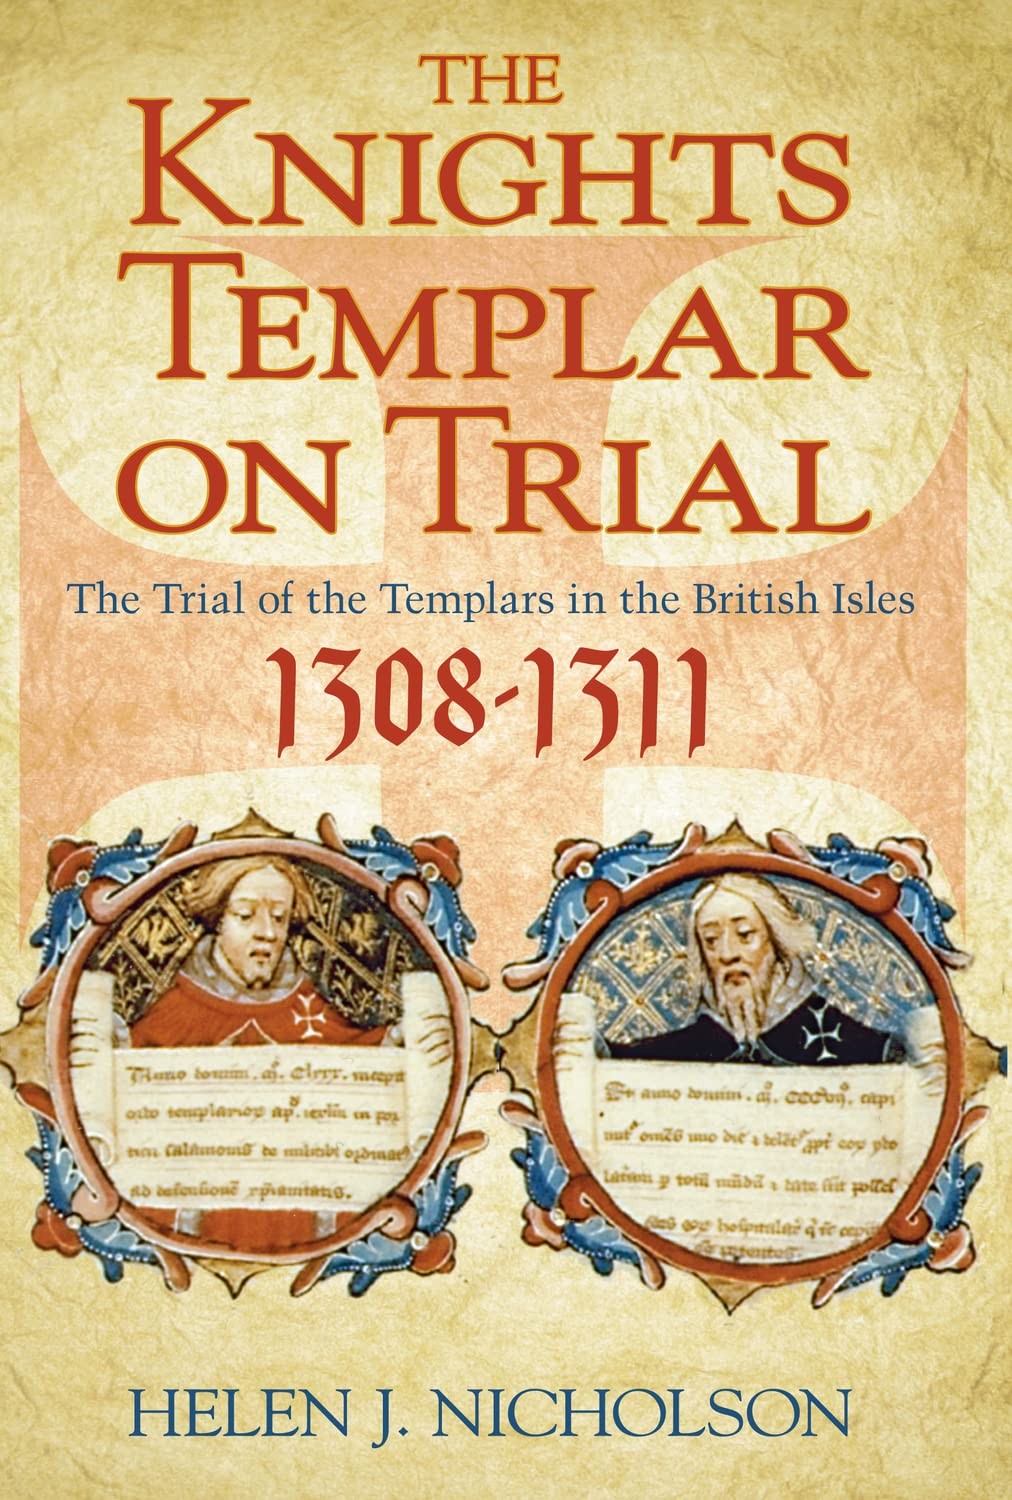 The Knights Templar on Trial: The Trial of the Templars in the British Isles 1308-1311